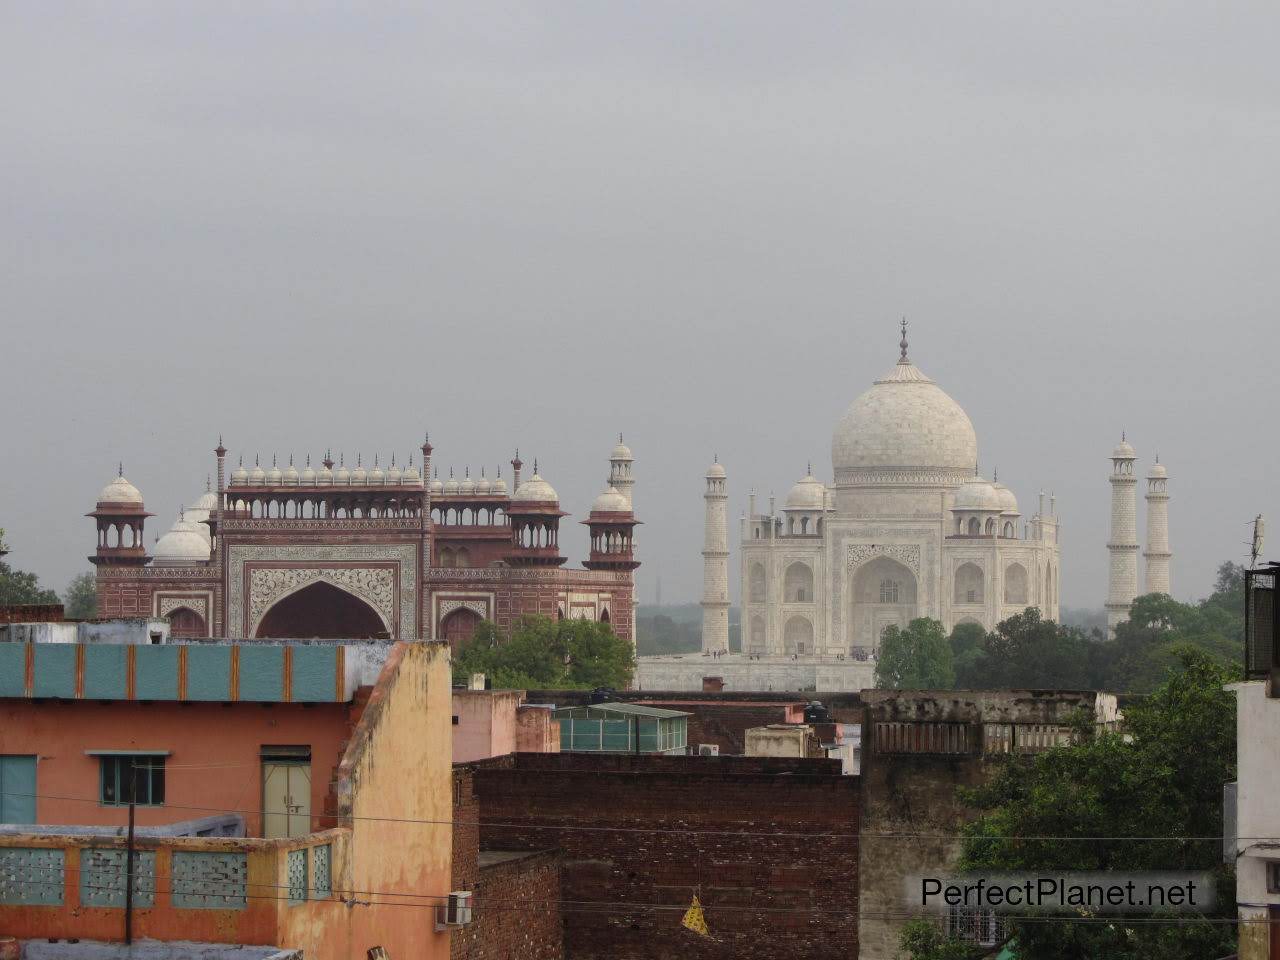 Views of the Taj Mahal from the roof of the Sani